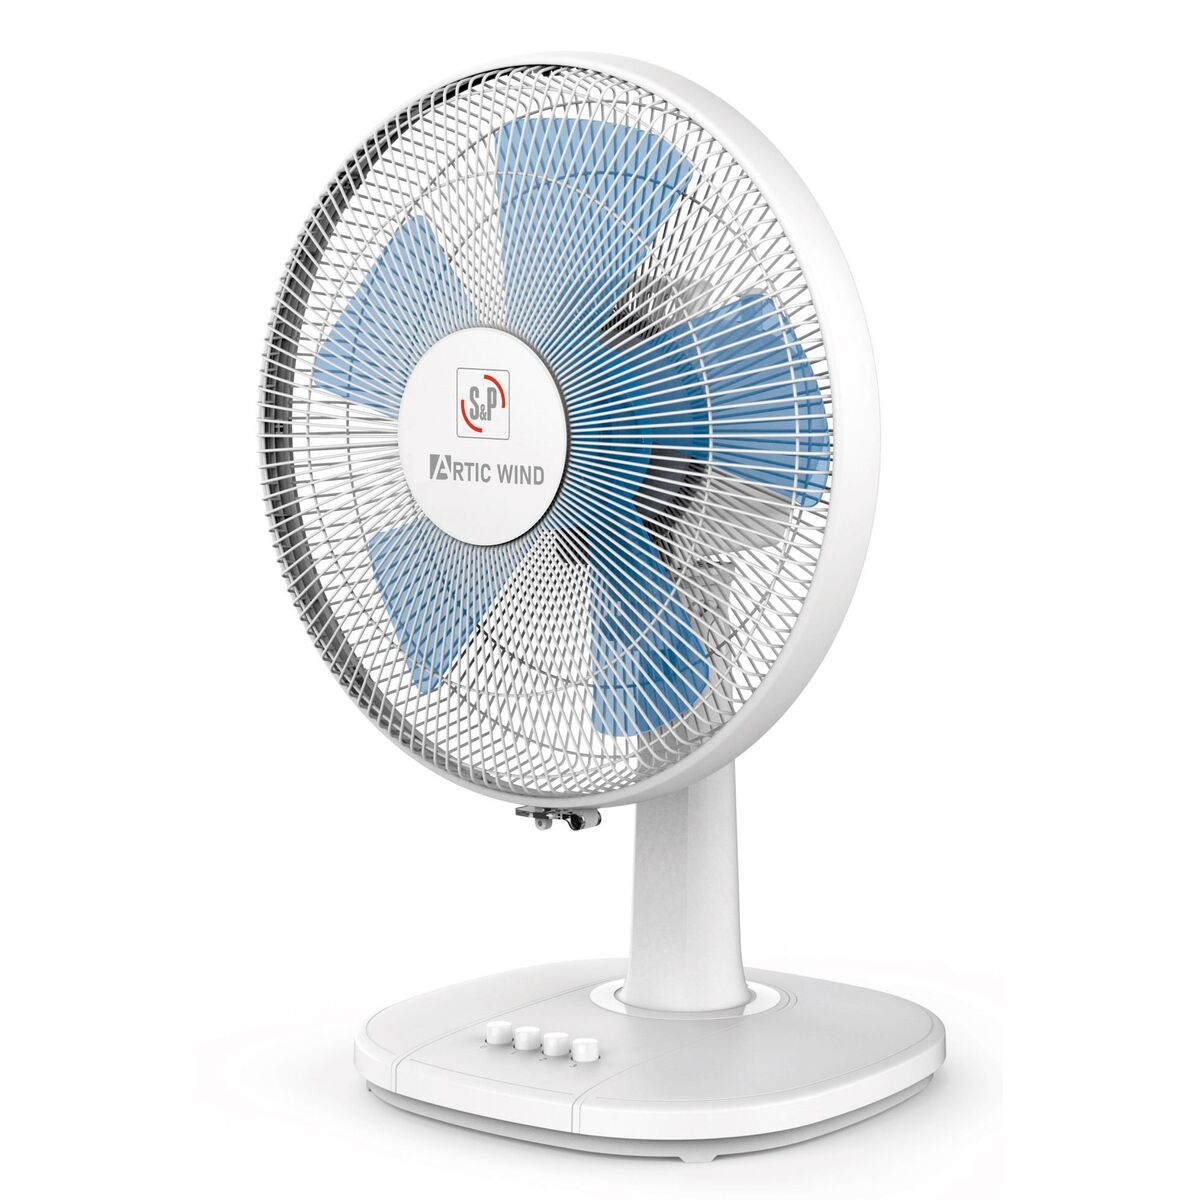 Table Fan S&P ARTIC WIND400 55 W, S&P, Home and cooking, Portable air conditioning, table-fan-s-p-artic-wind400-55-w, Brand_S&P, category-reference-2399, category-reference-2450, category-reference-2451, category-reference-t-19656, category-reference-t-21087, category-reference-t-25217, category-reference-t-29129, Condition_NEW, ferretería, Price_50 - 100, summer, RiotNook